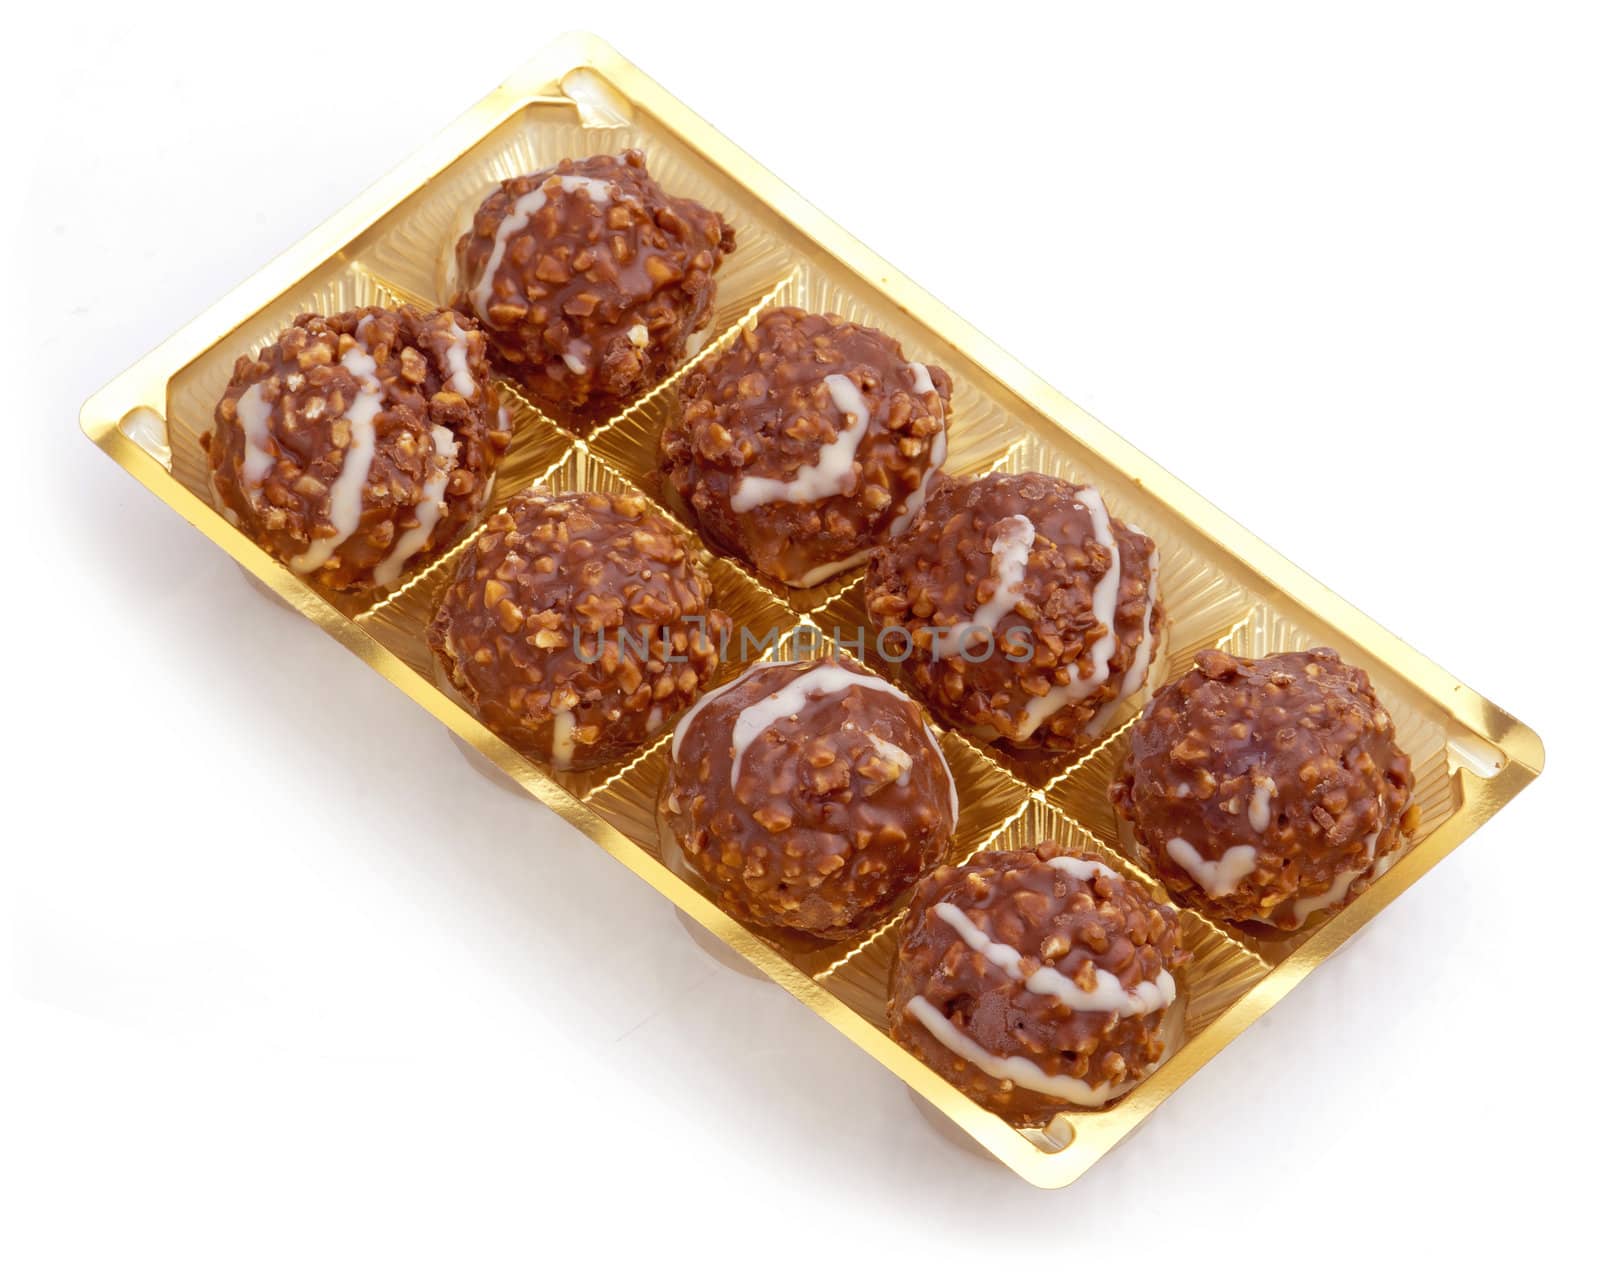 Sweet chocolate balls filled with hazelnuts in plastic package on a white background.







Sweet chocolate balls filled with hazelnuts in plastic package on a white background.